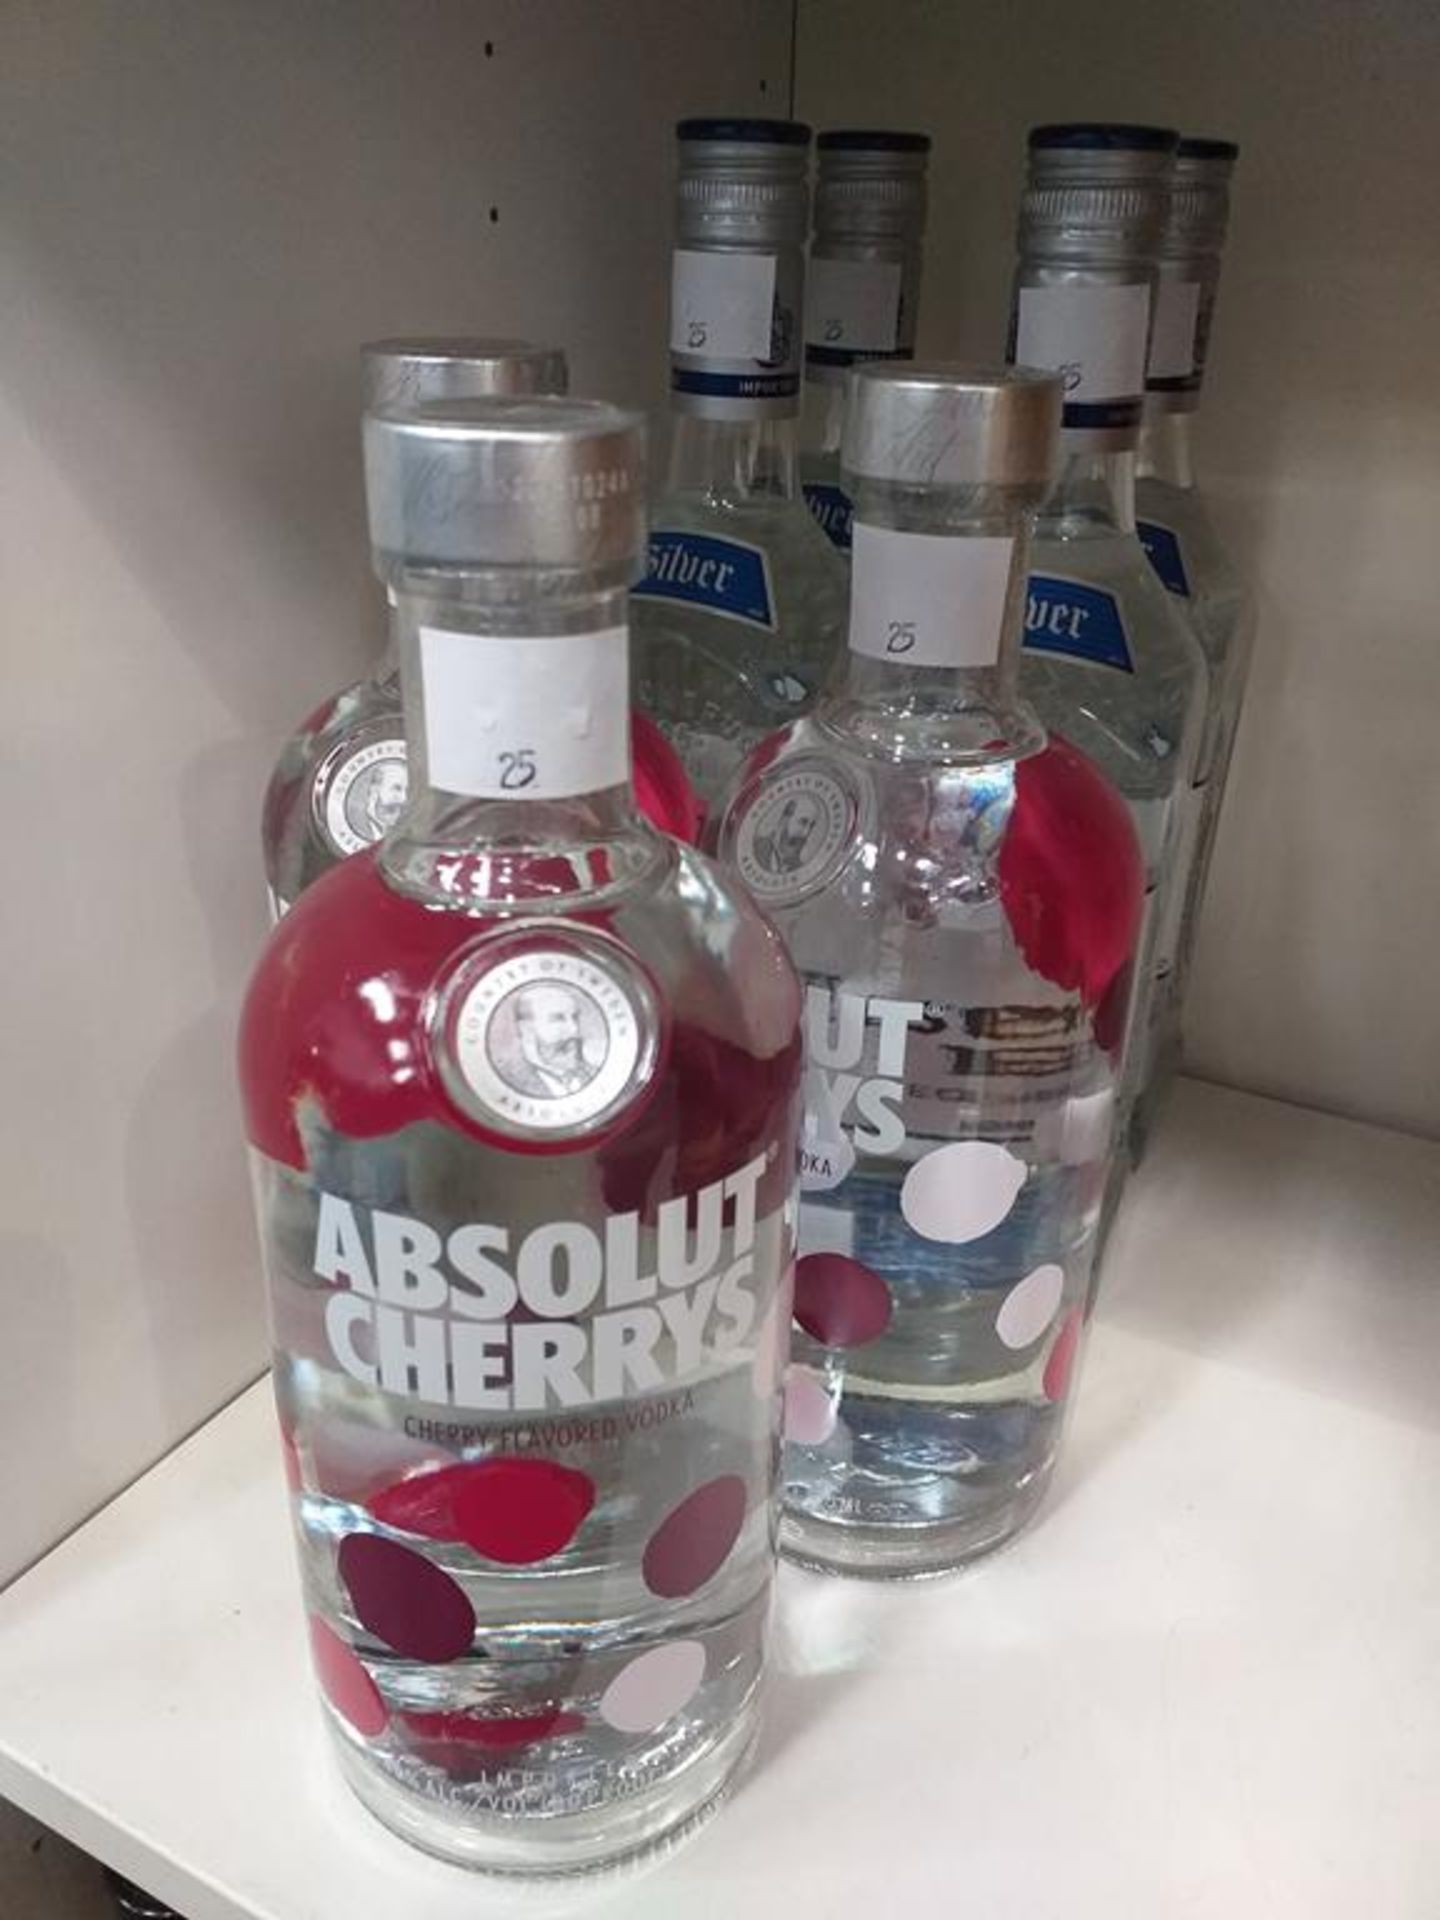 Four bottles of Jose Cuervo Especial Tequila Silver and three bottles of Absolut Cherry's Vodka